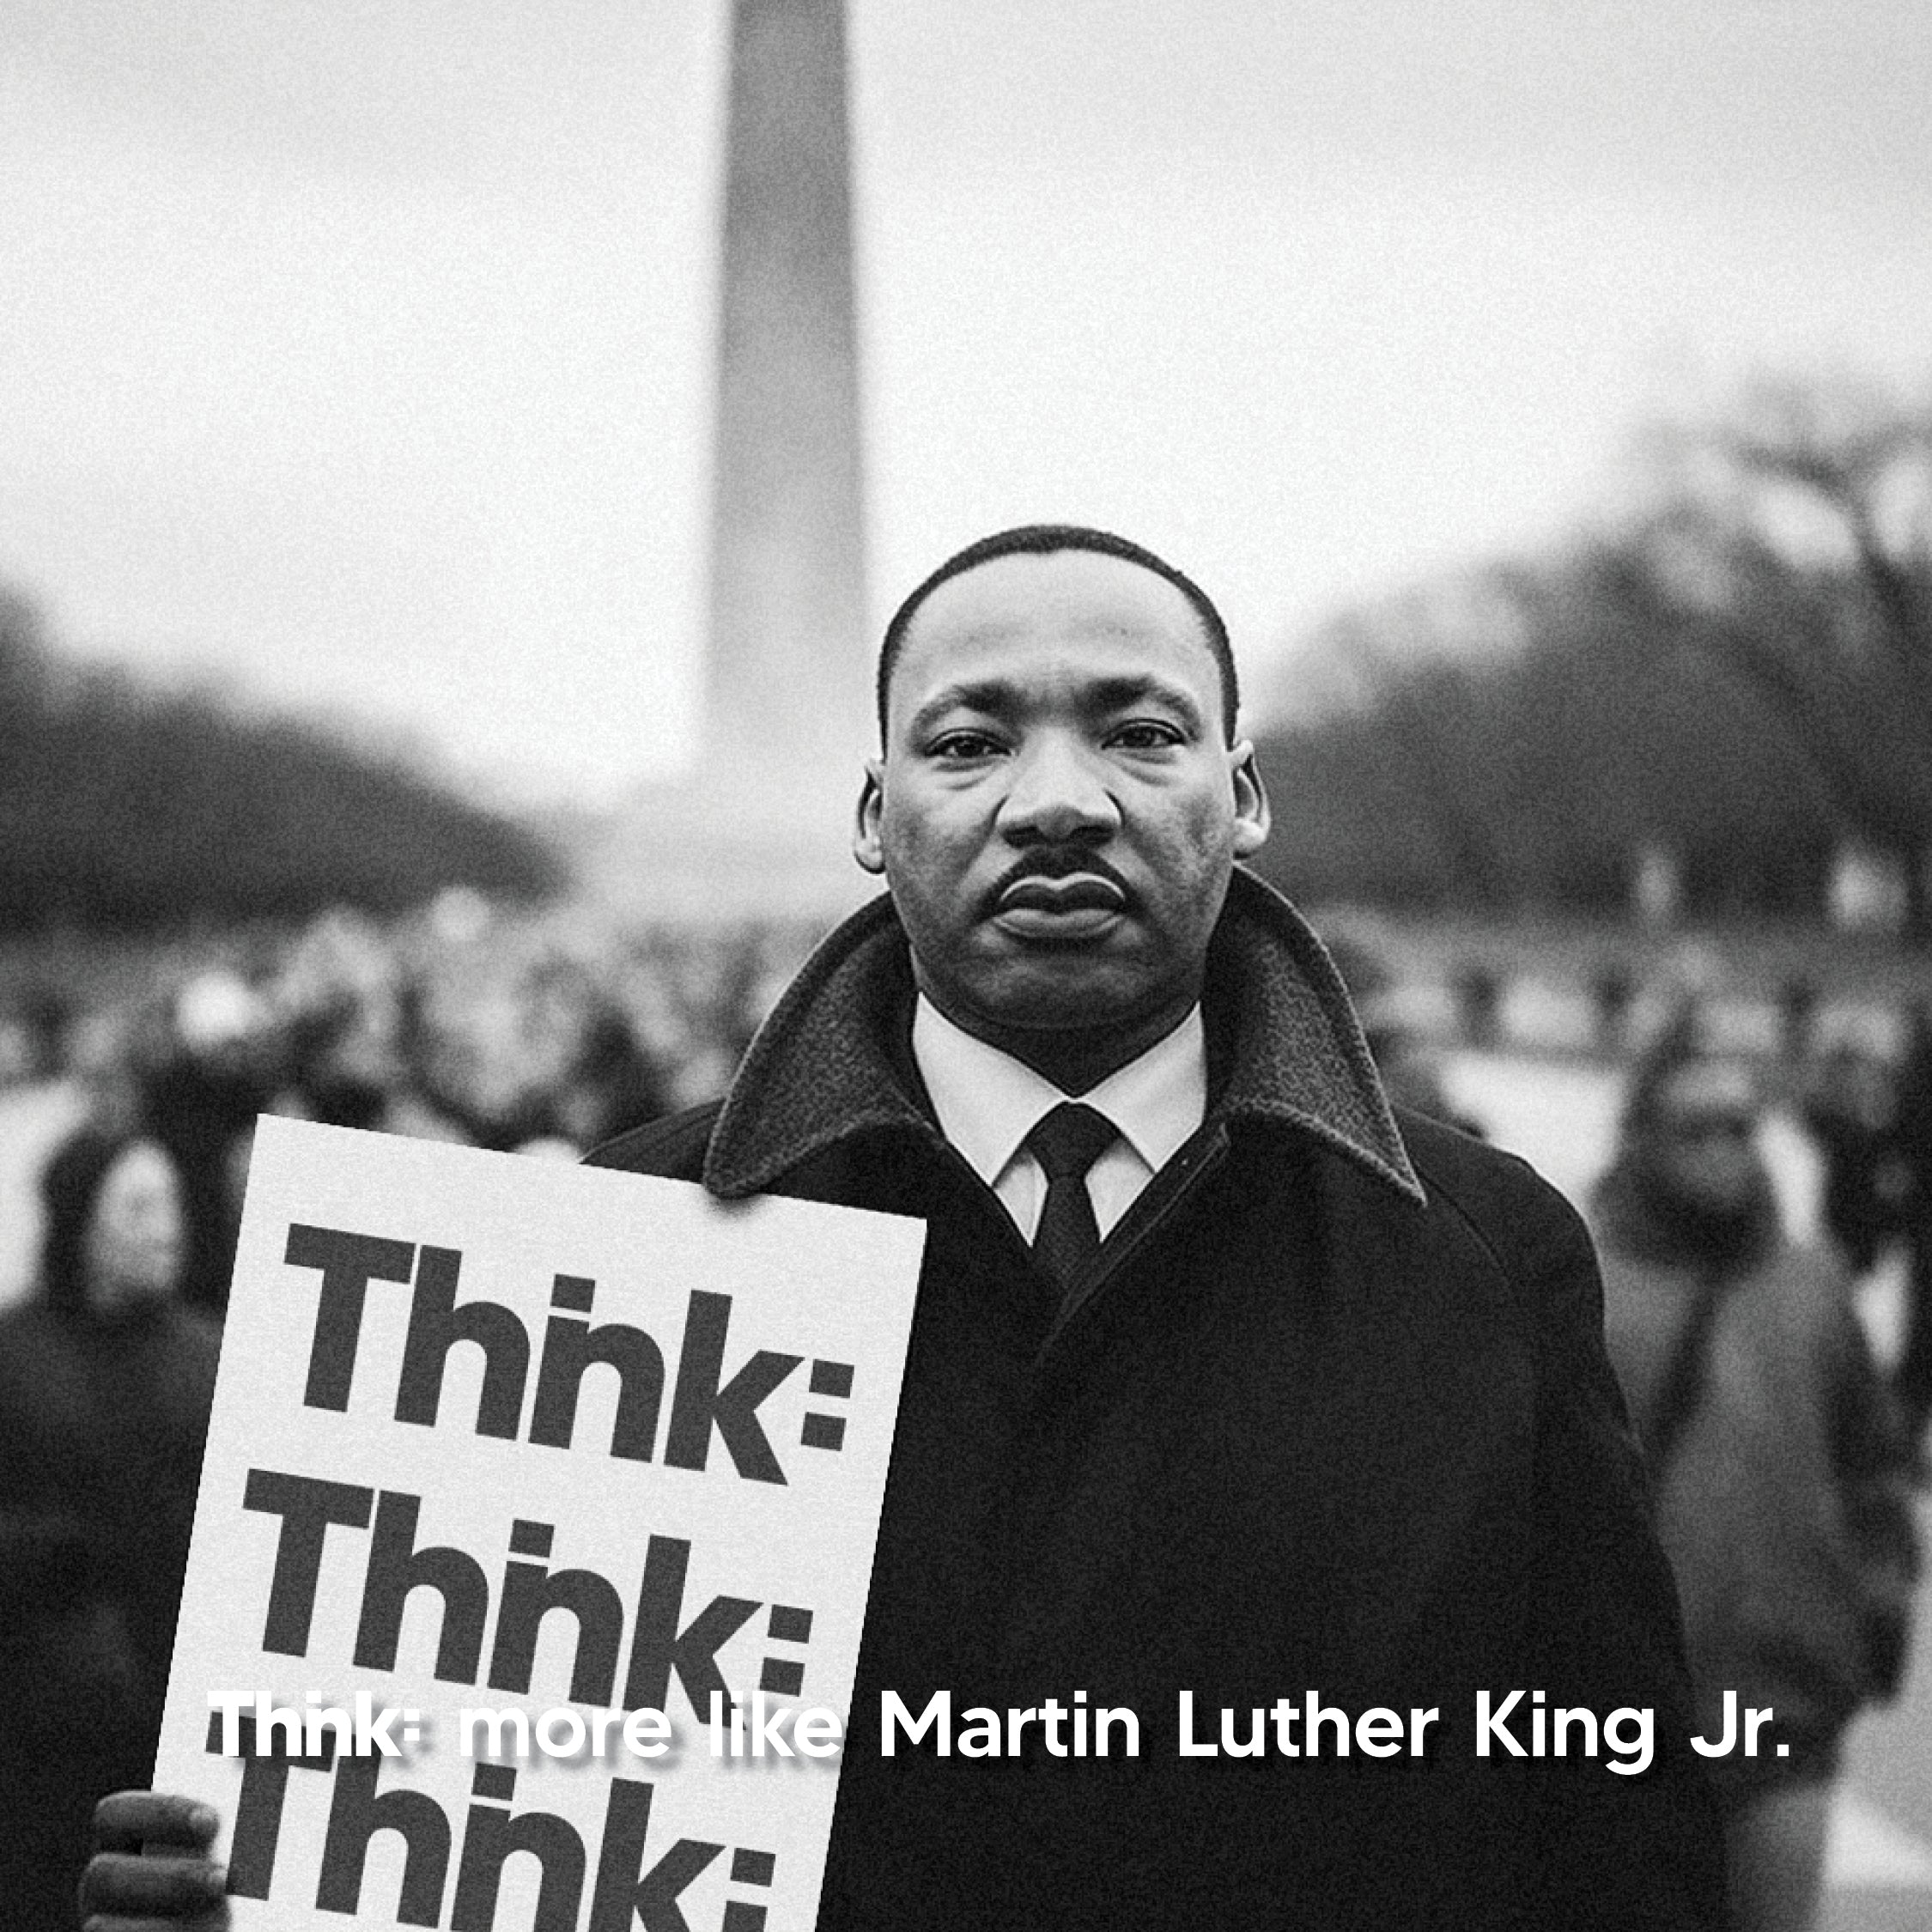 Thnk: More Like Martin Luther King Jr.